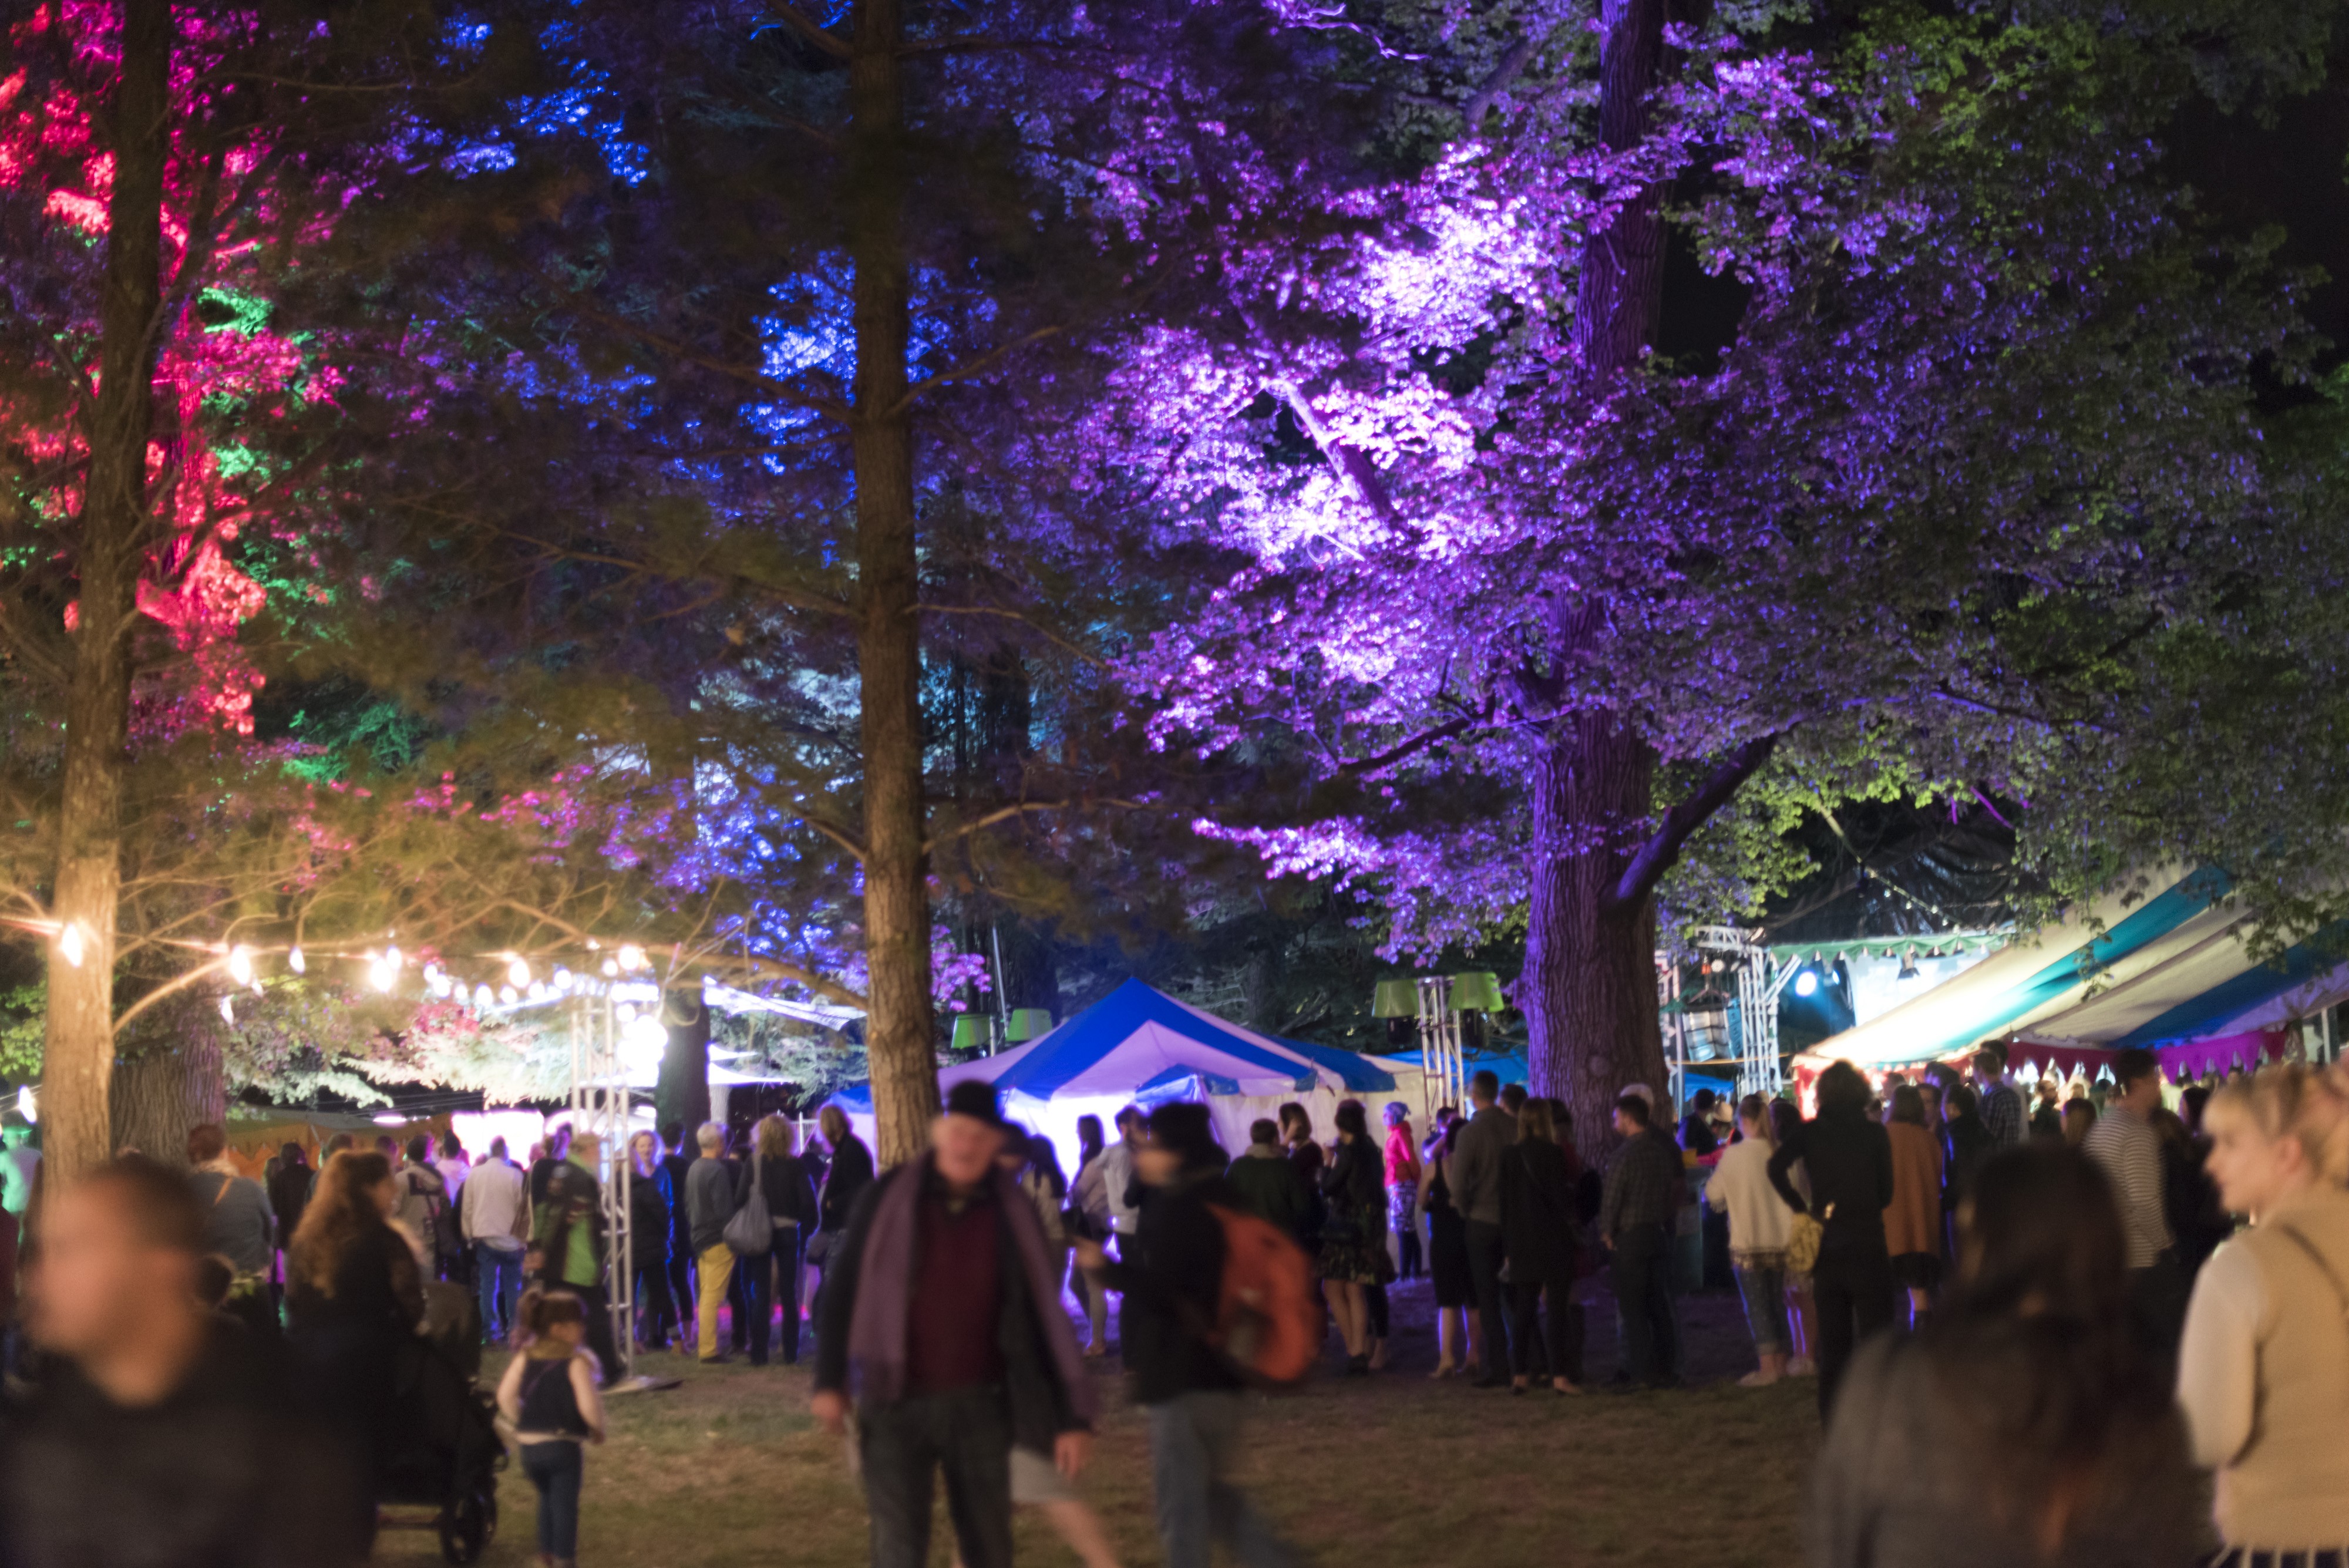 Haig Park festival to welcome spring with light and music